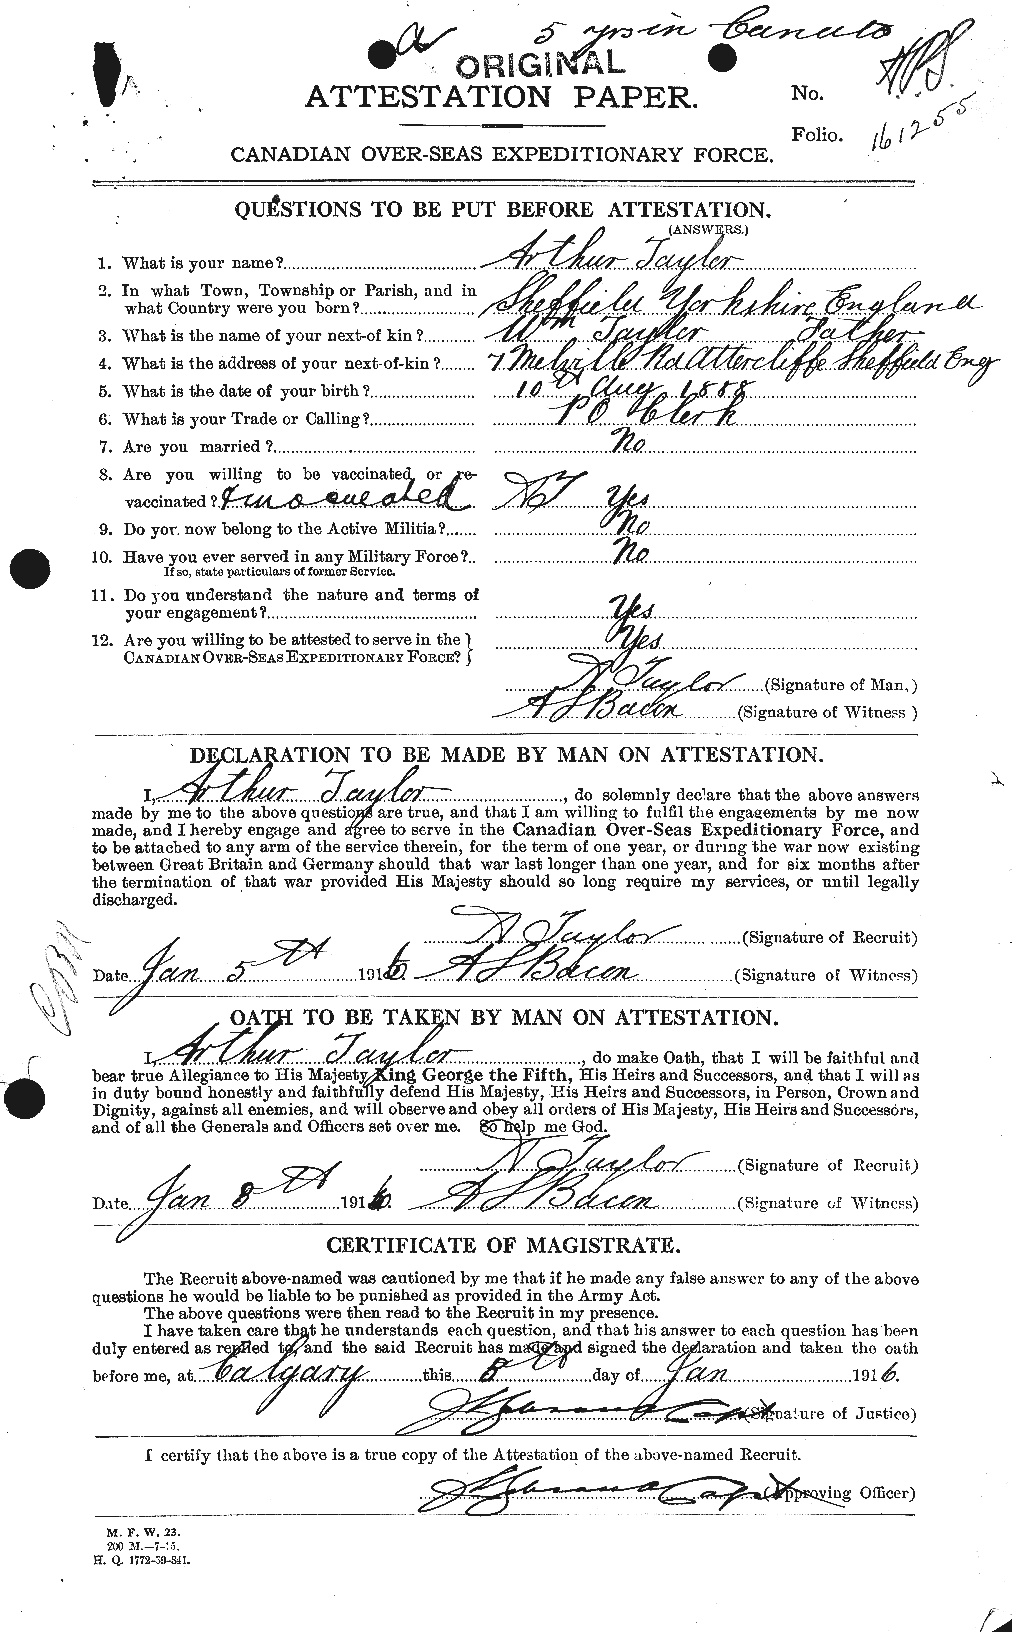 Personnel Records of the First World War - CEF 626697a